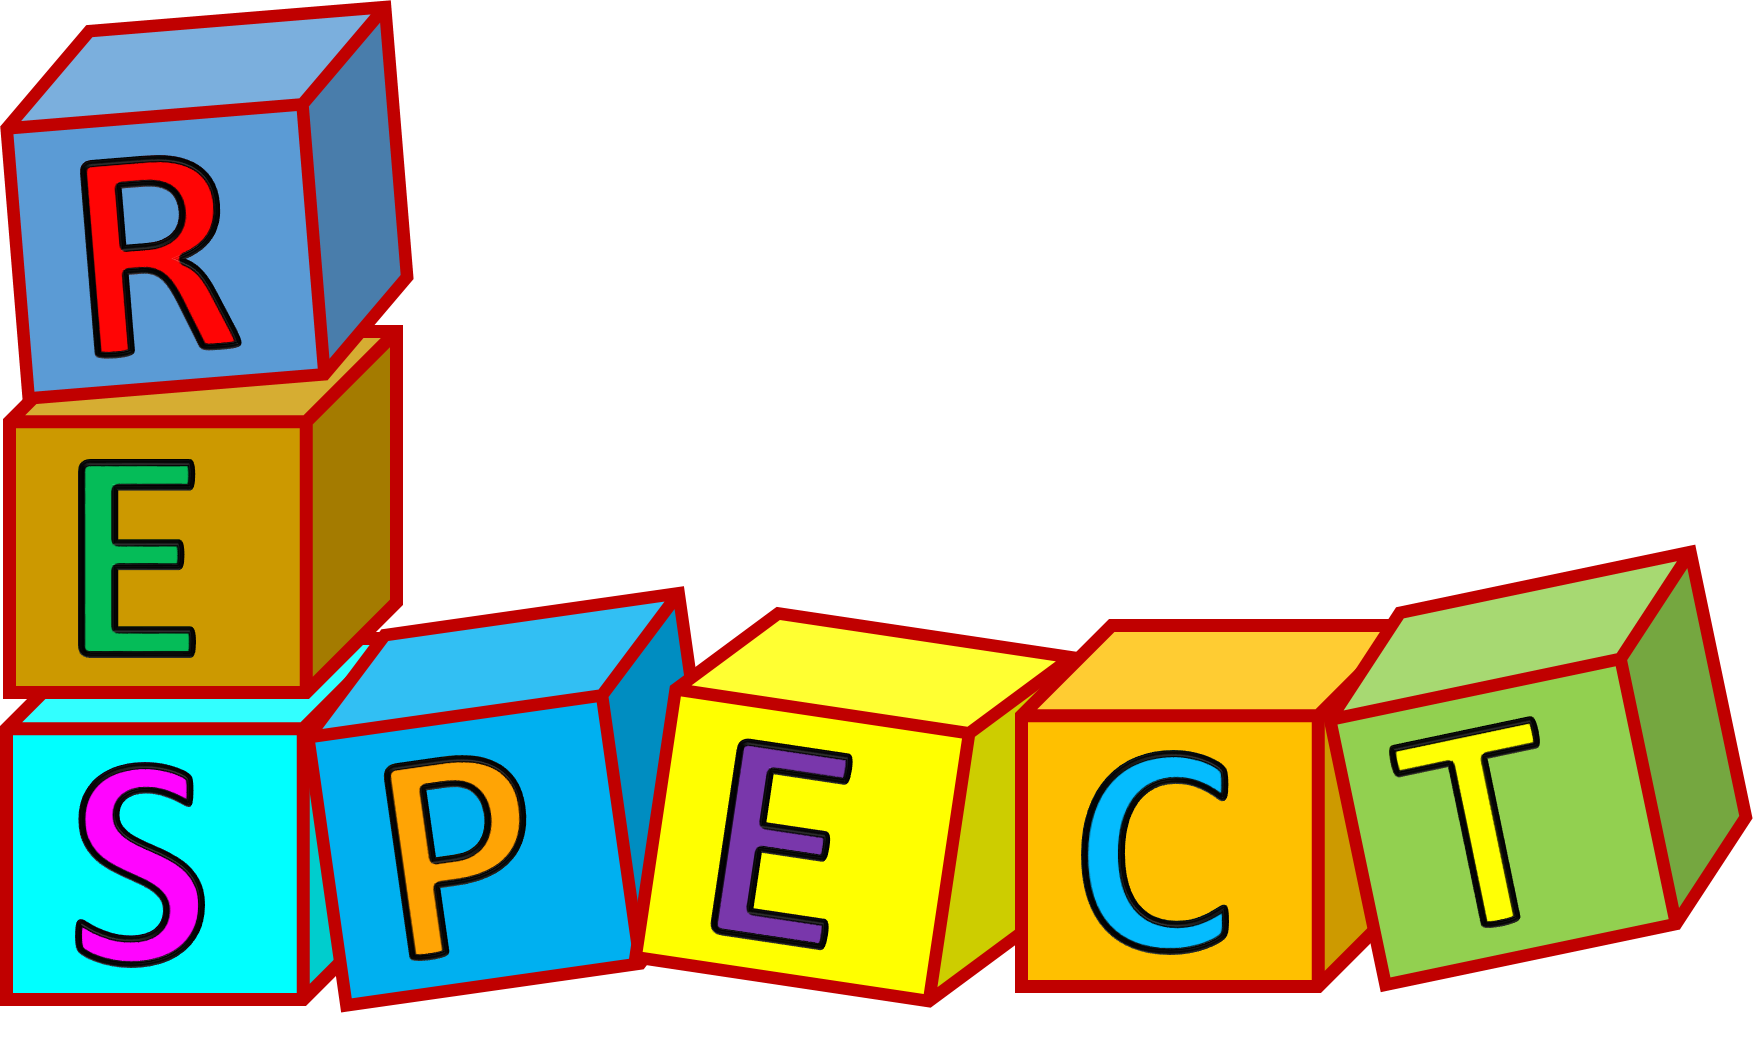 Https Openclipart Org Image 8 - Respect Clipart